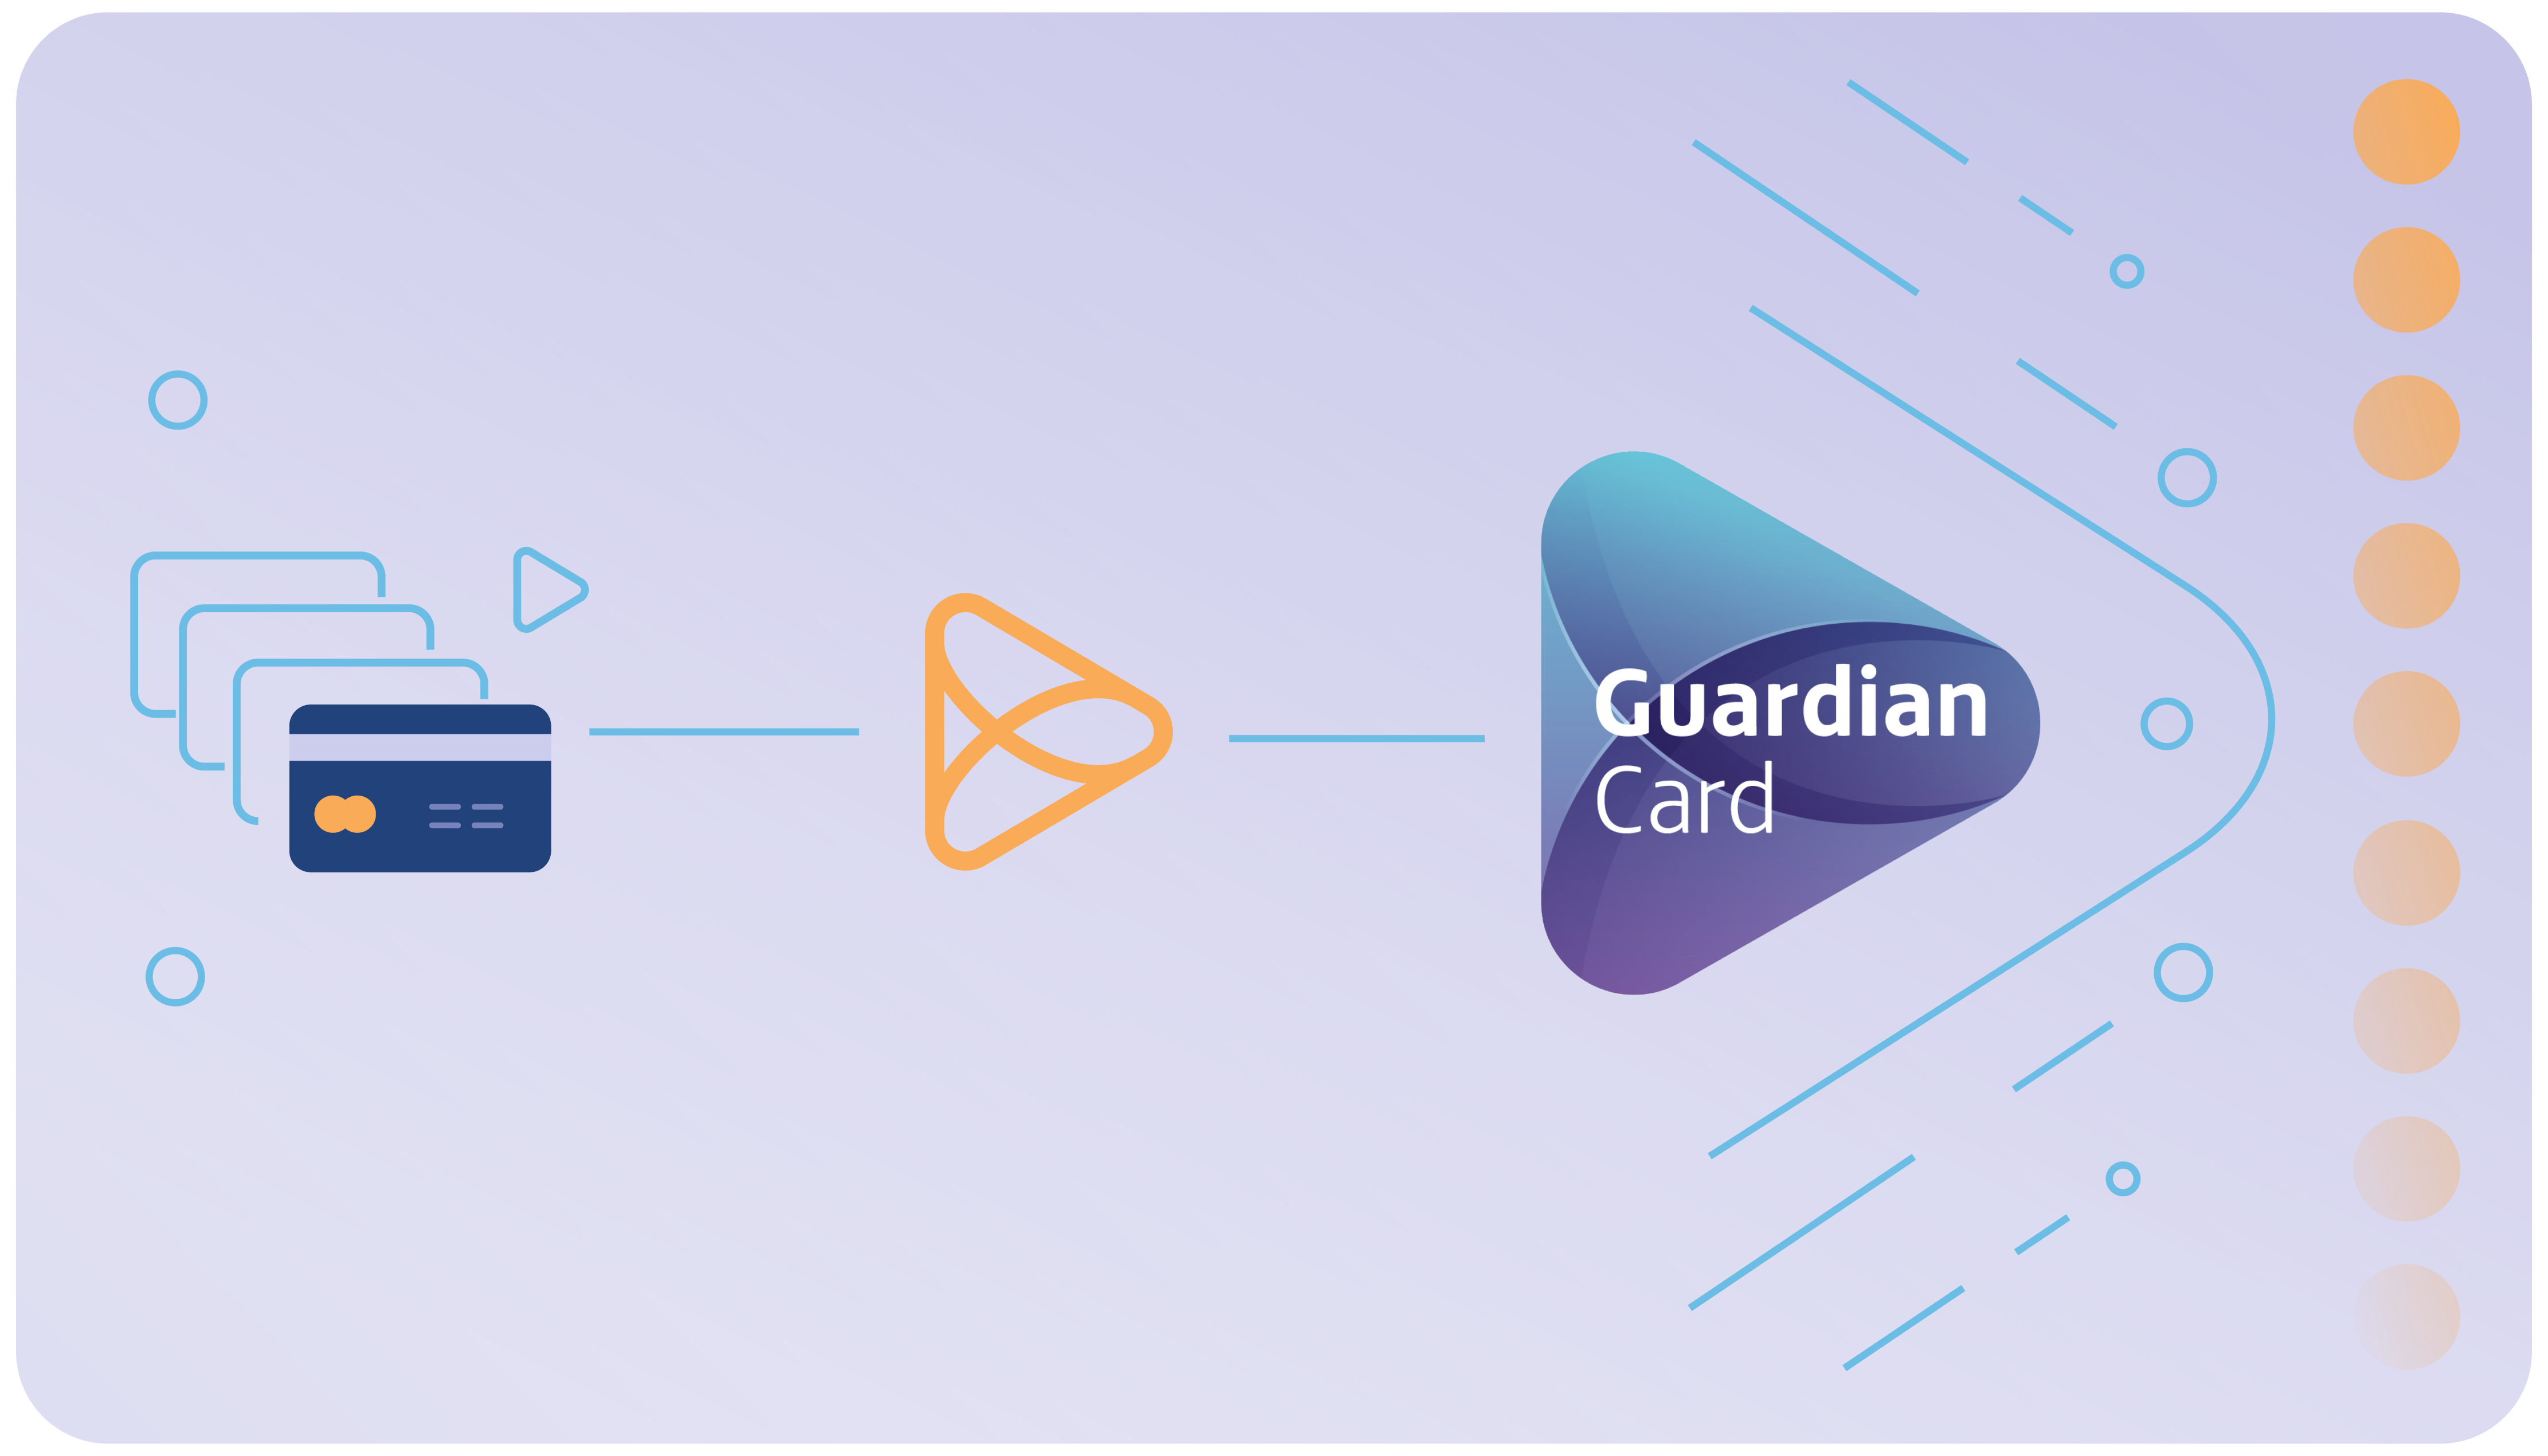 Getting to know more about Guardiancard